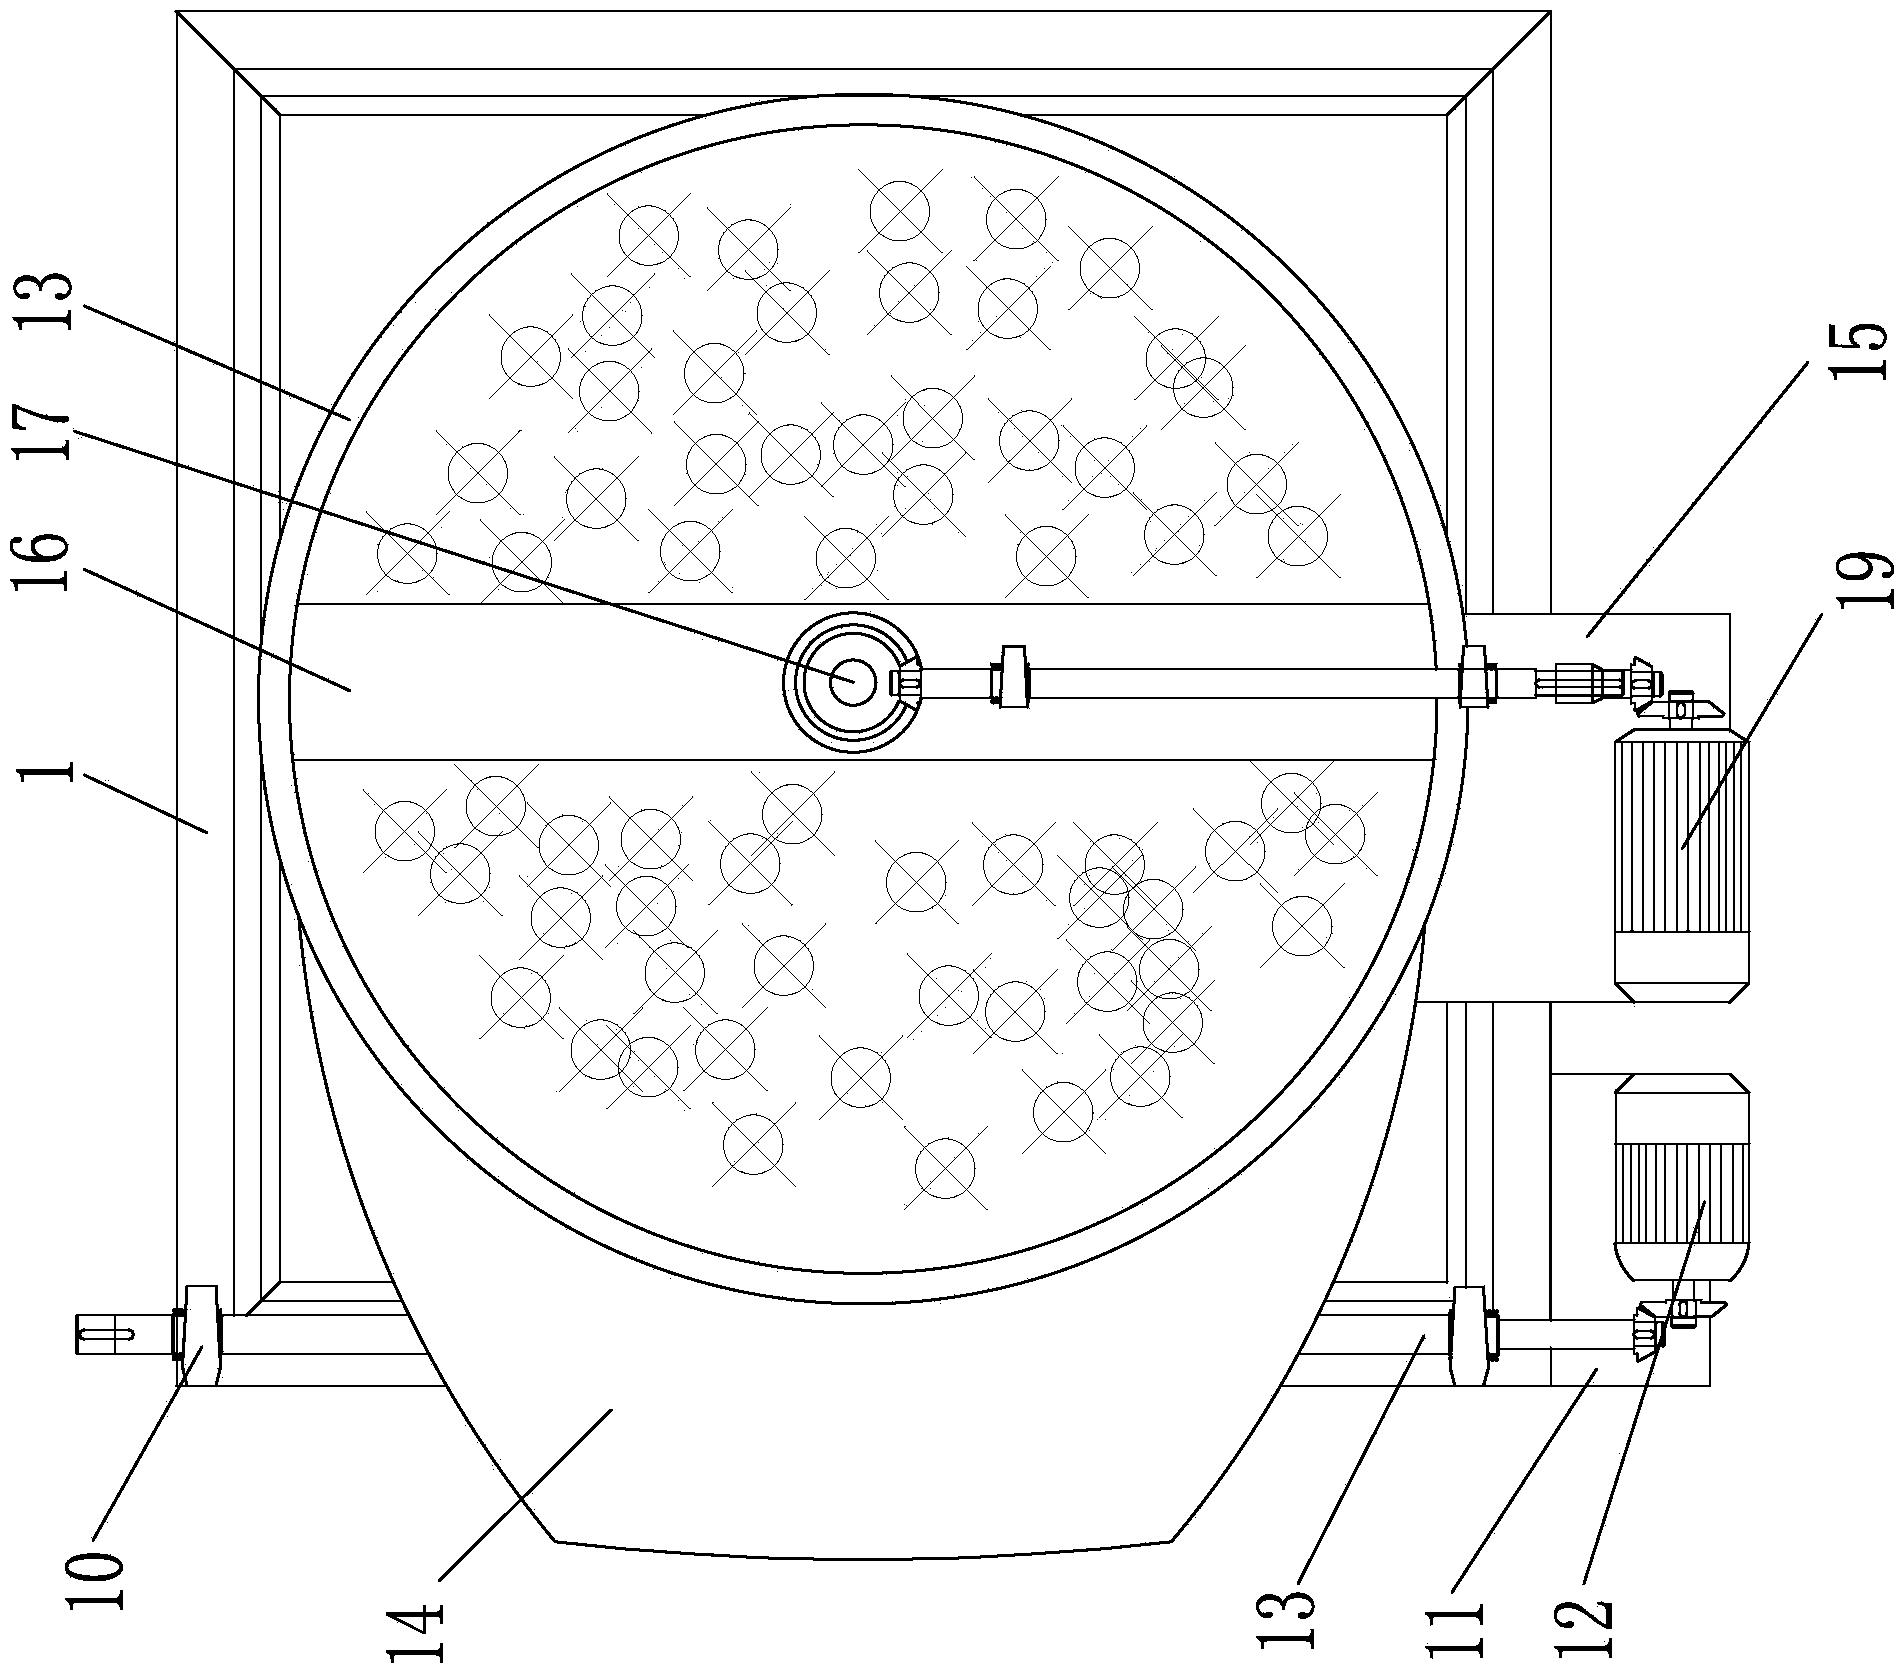 Full-automatic oil and water separation fryer